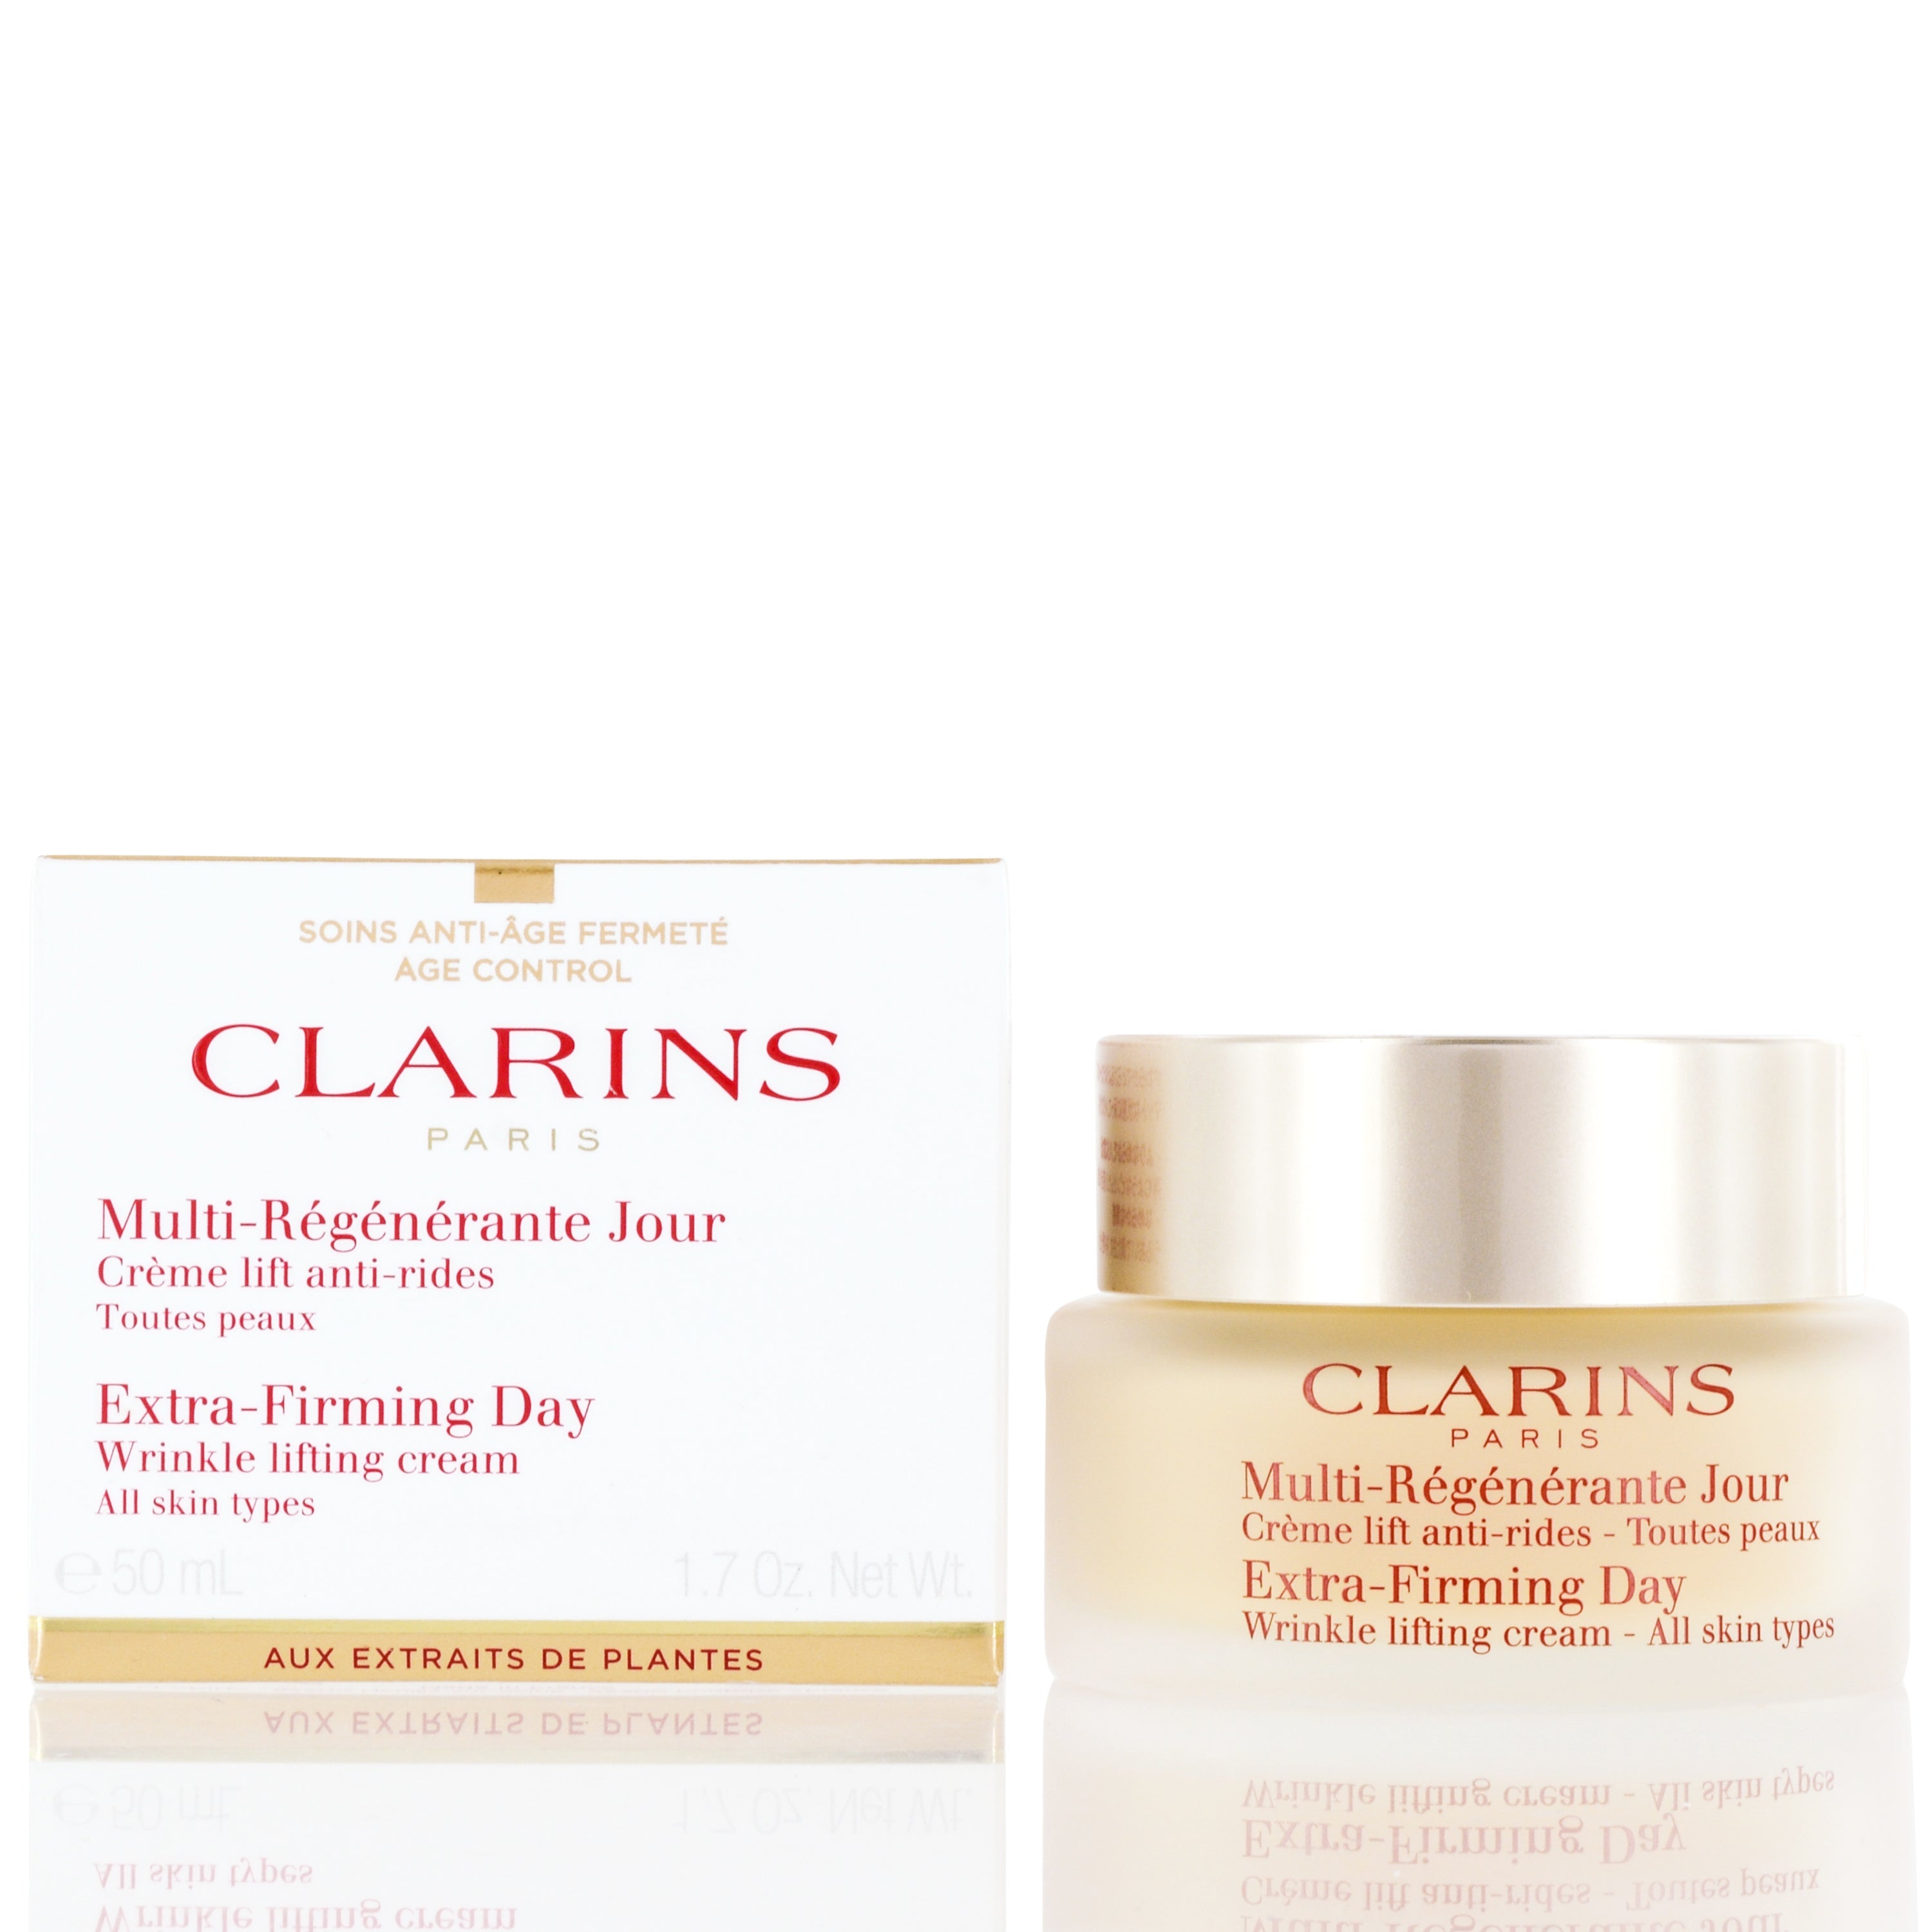 Clarins Extra-Firming Day Wrinkle Lifting Cream 1.7 Oz (50 Ml)